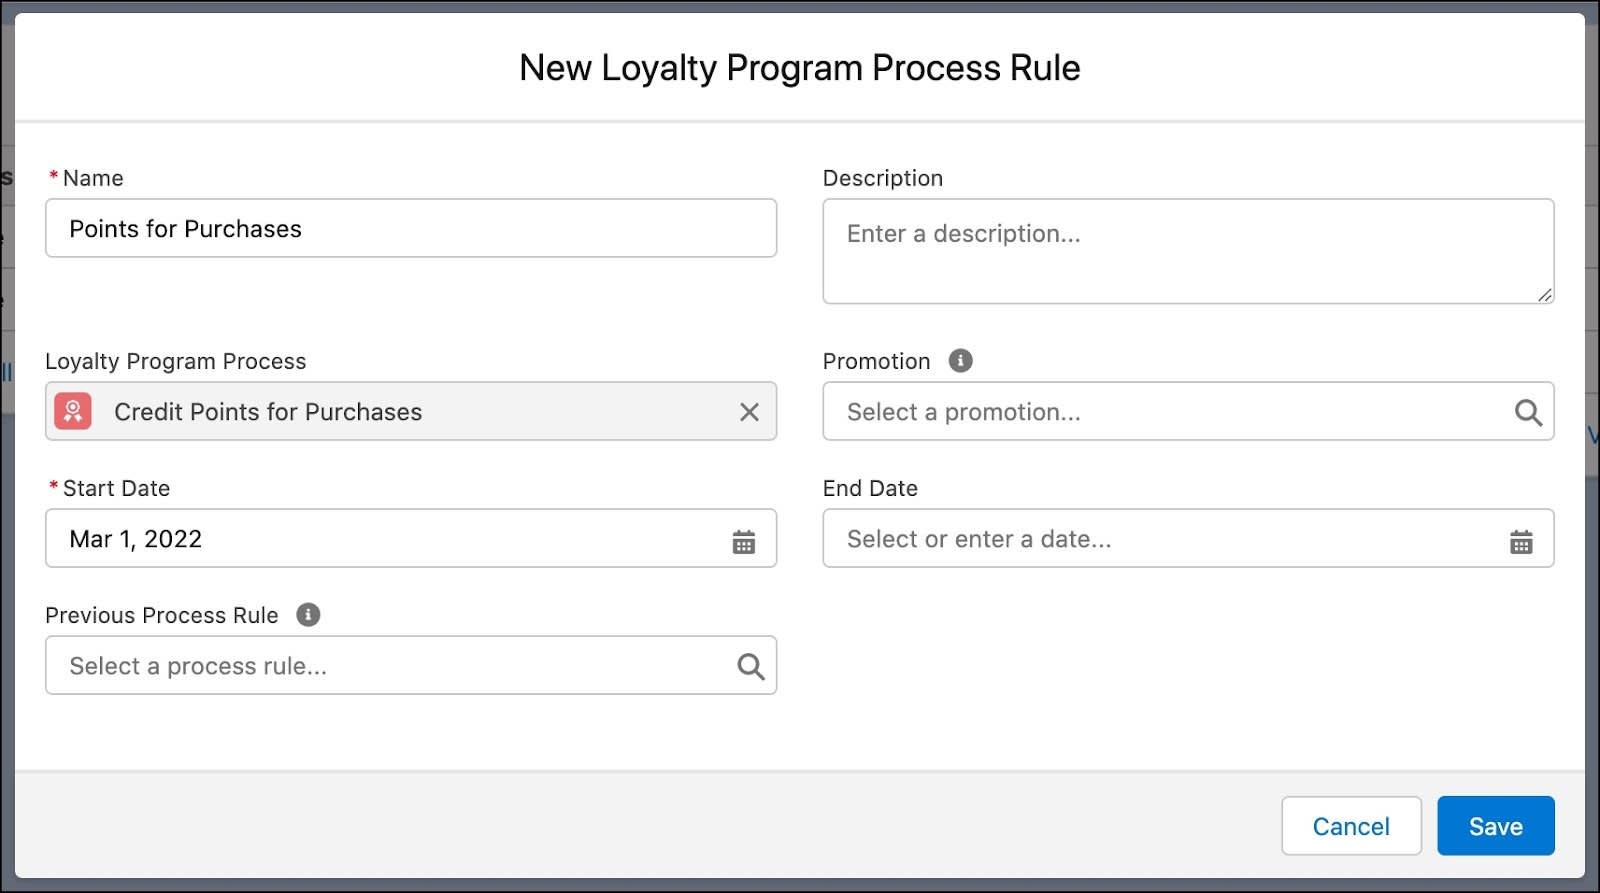 The New Loyalty Program Process Rule window where you create a new rule